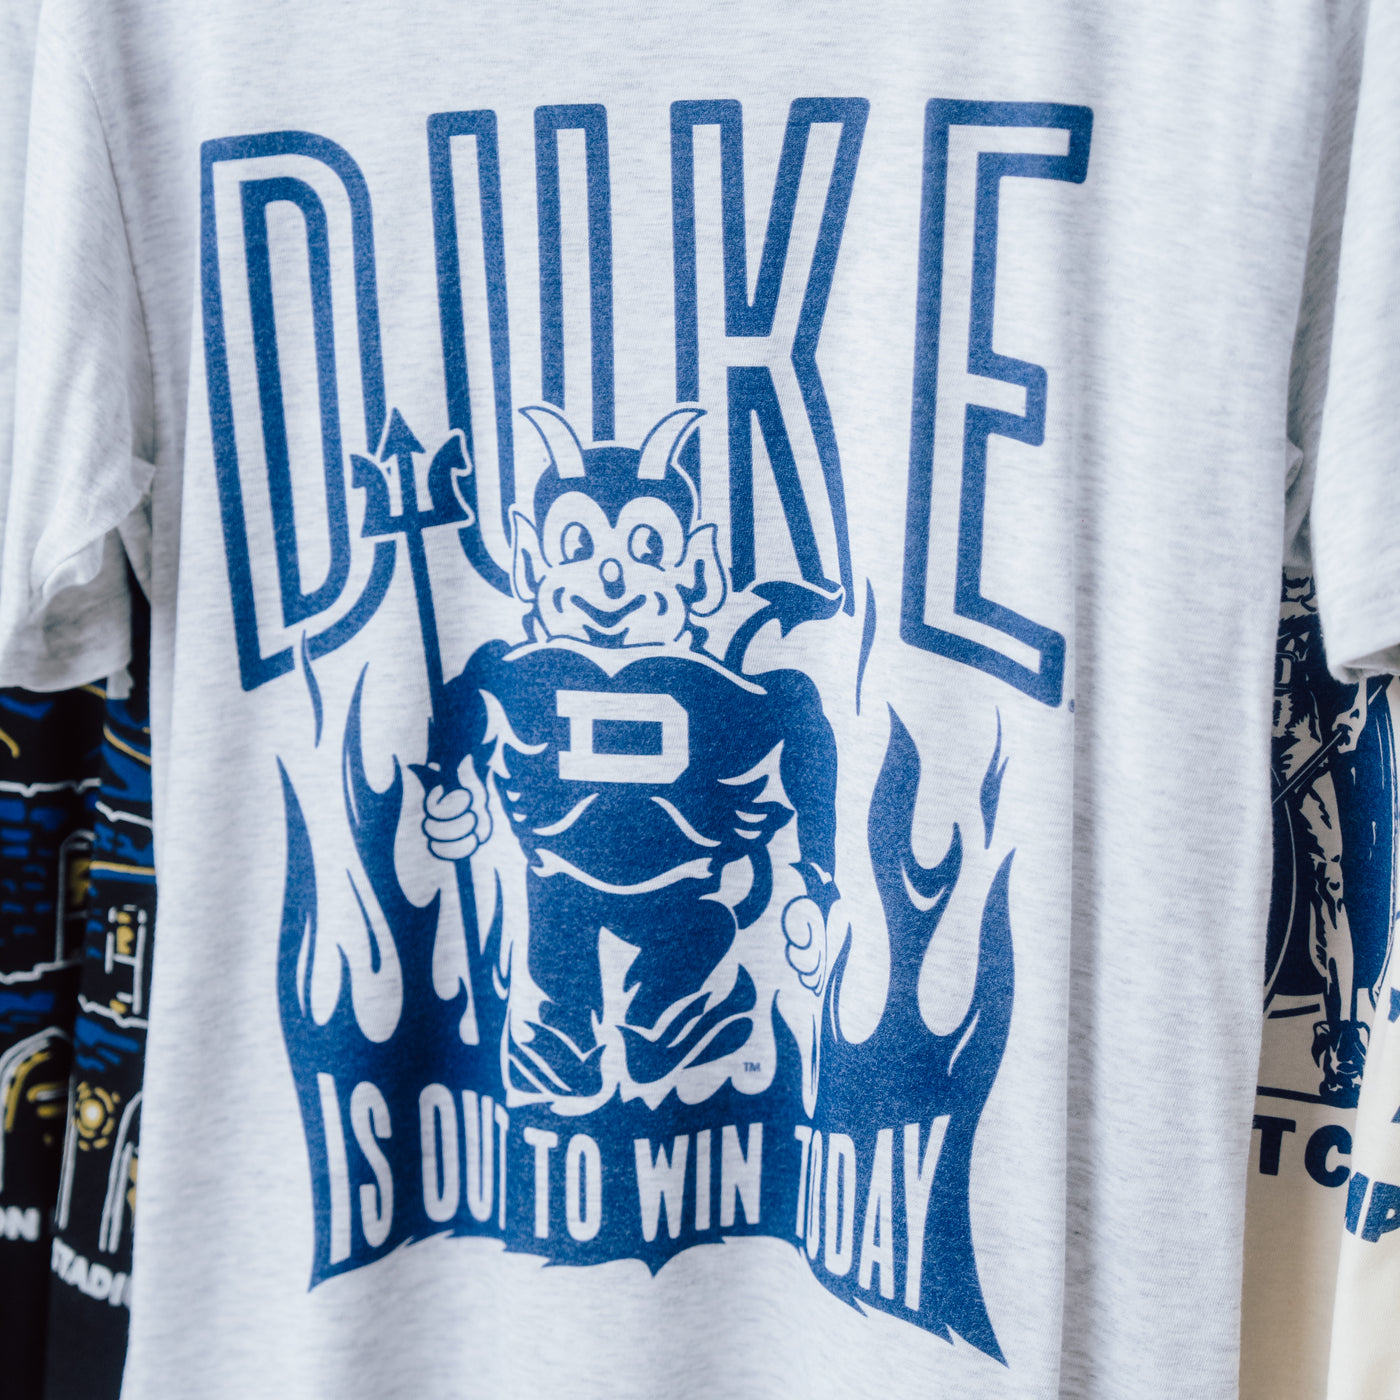 Vintage "Duke is Out To Win Today" Tee